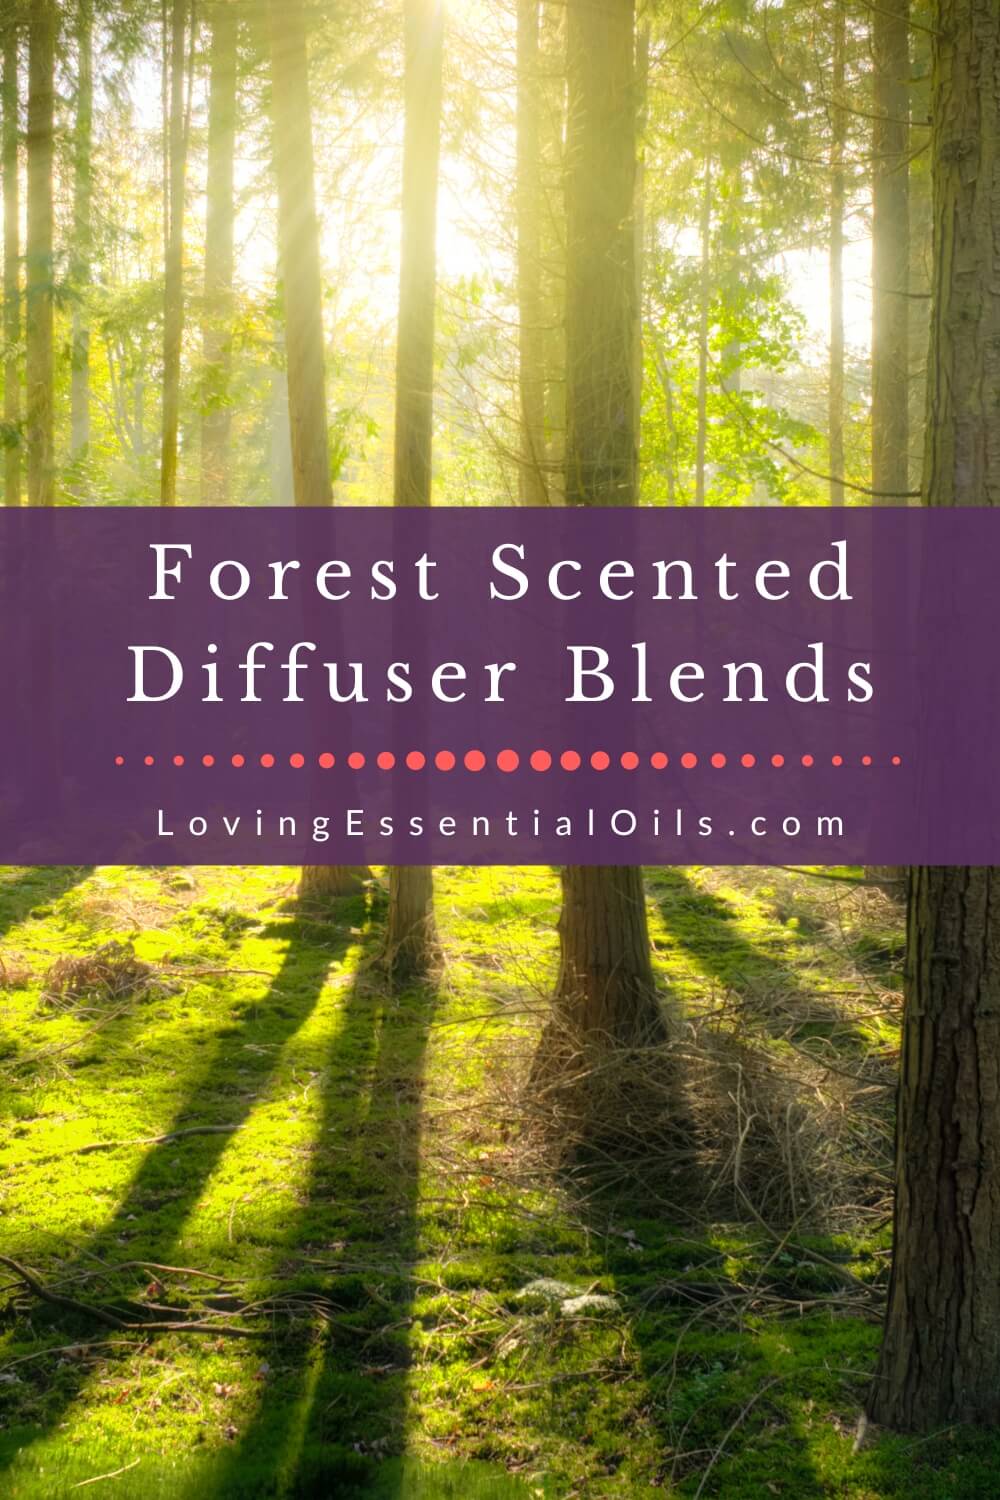 Forest Scented Diffuser Blends by Loving Essential Oils